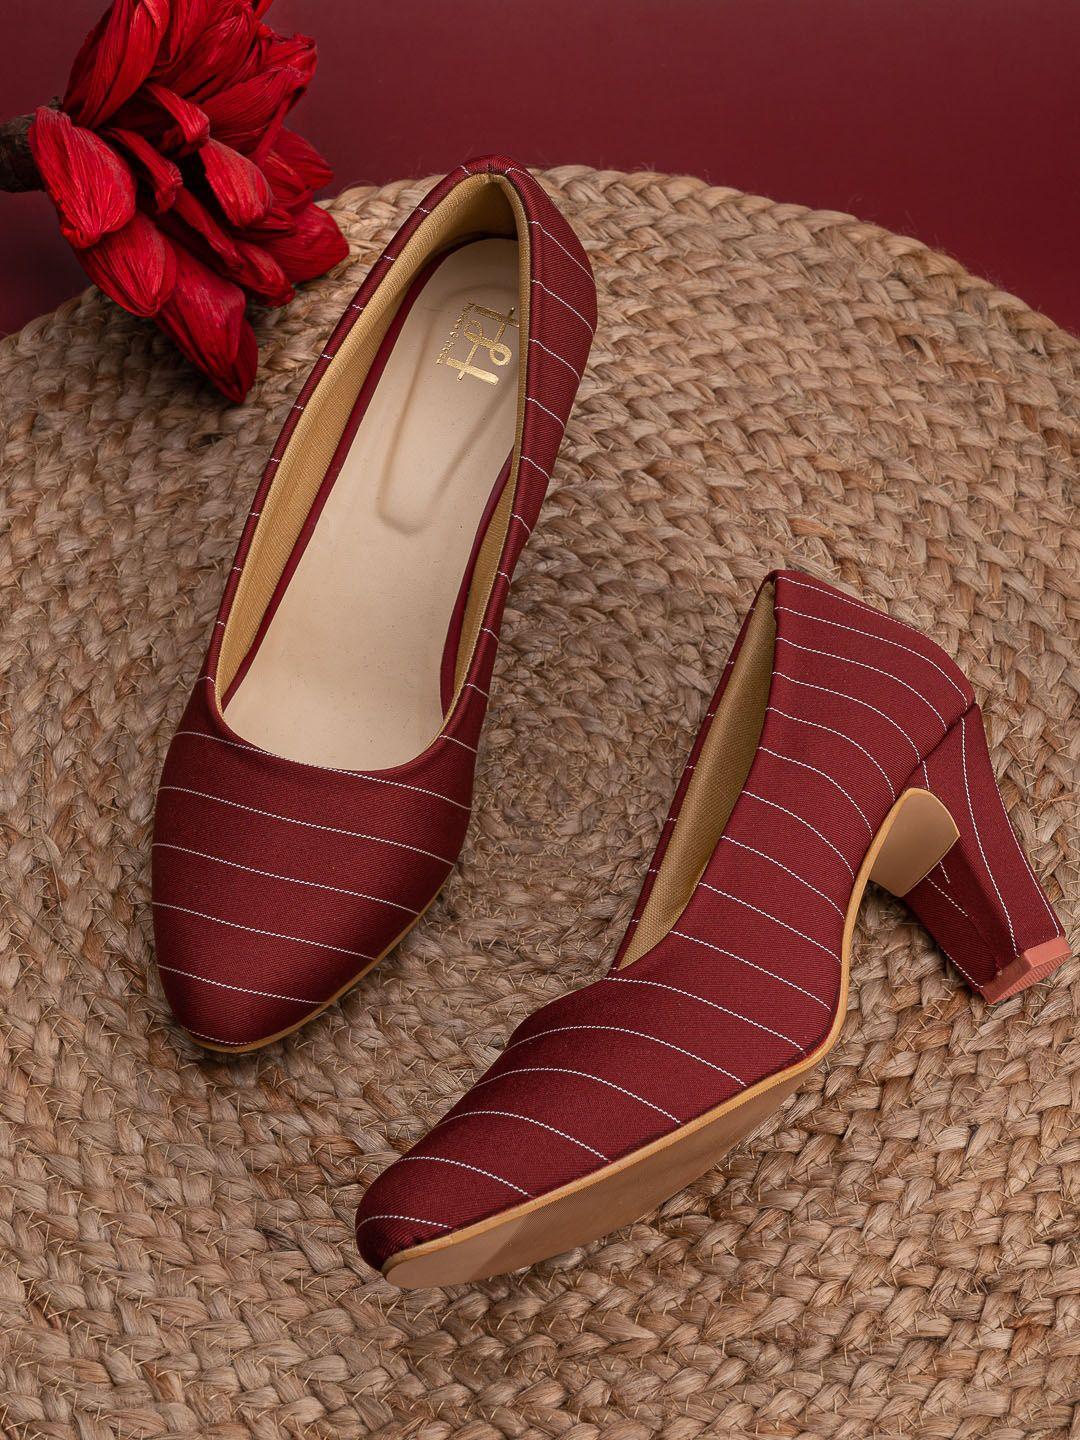 hydes n hues red striped block pumps